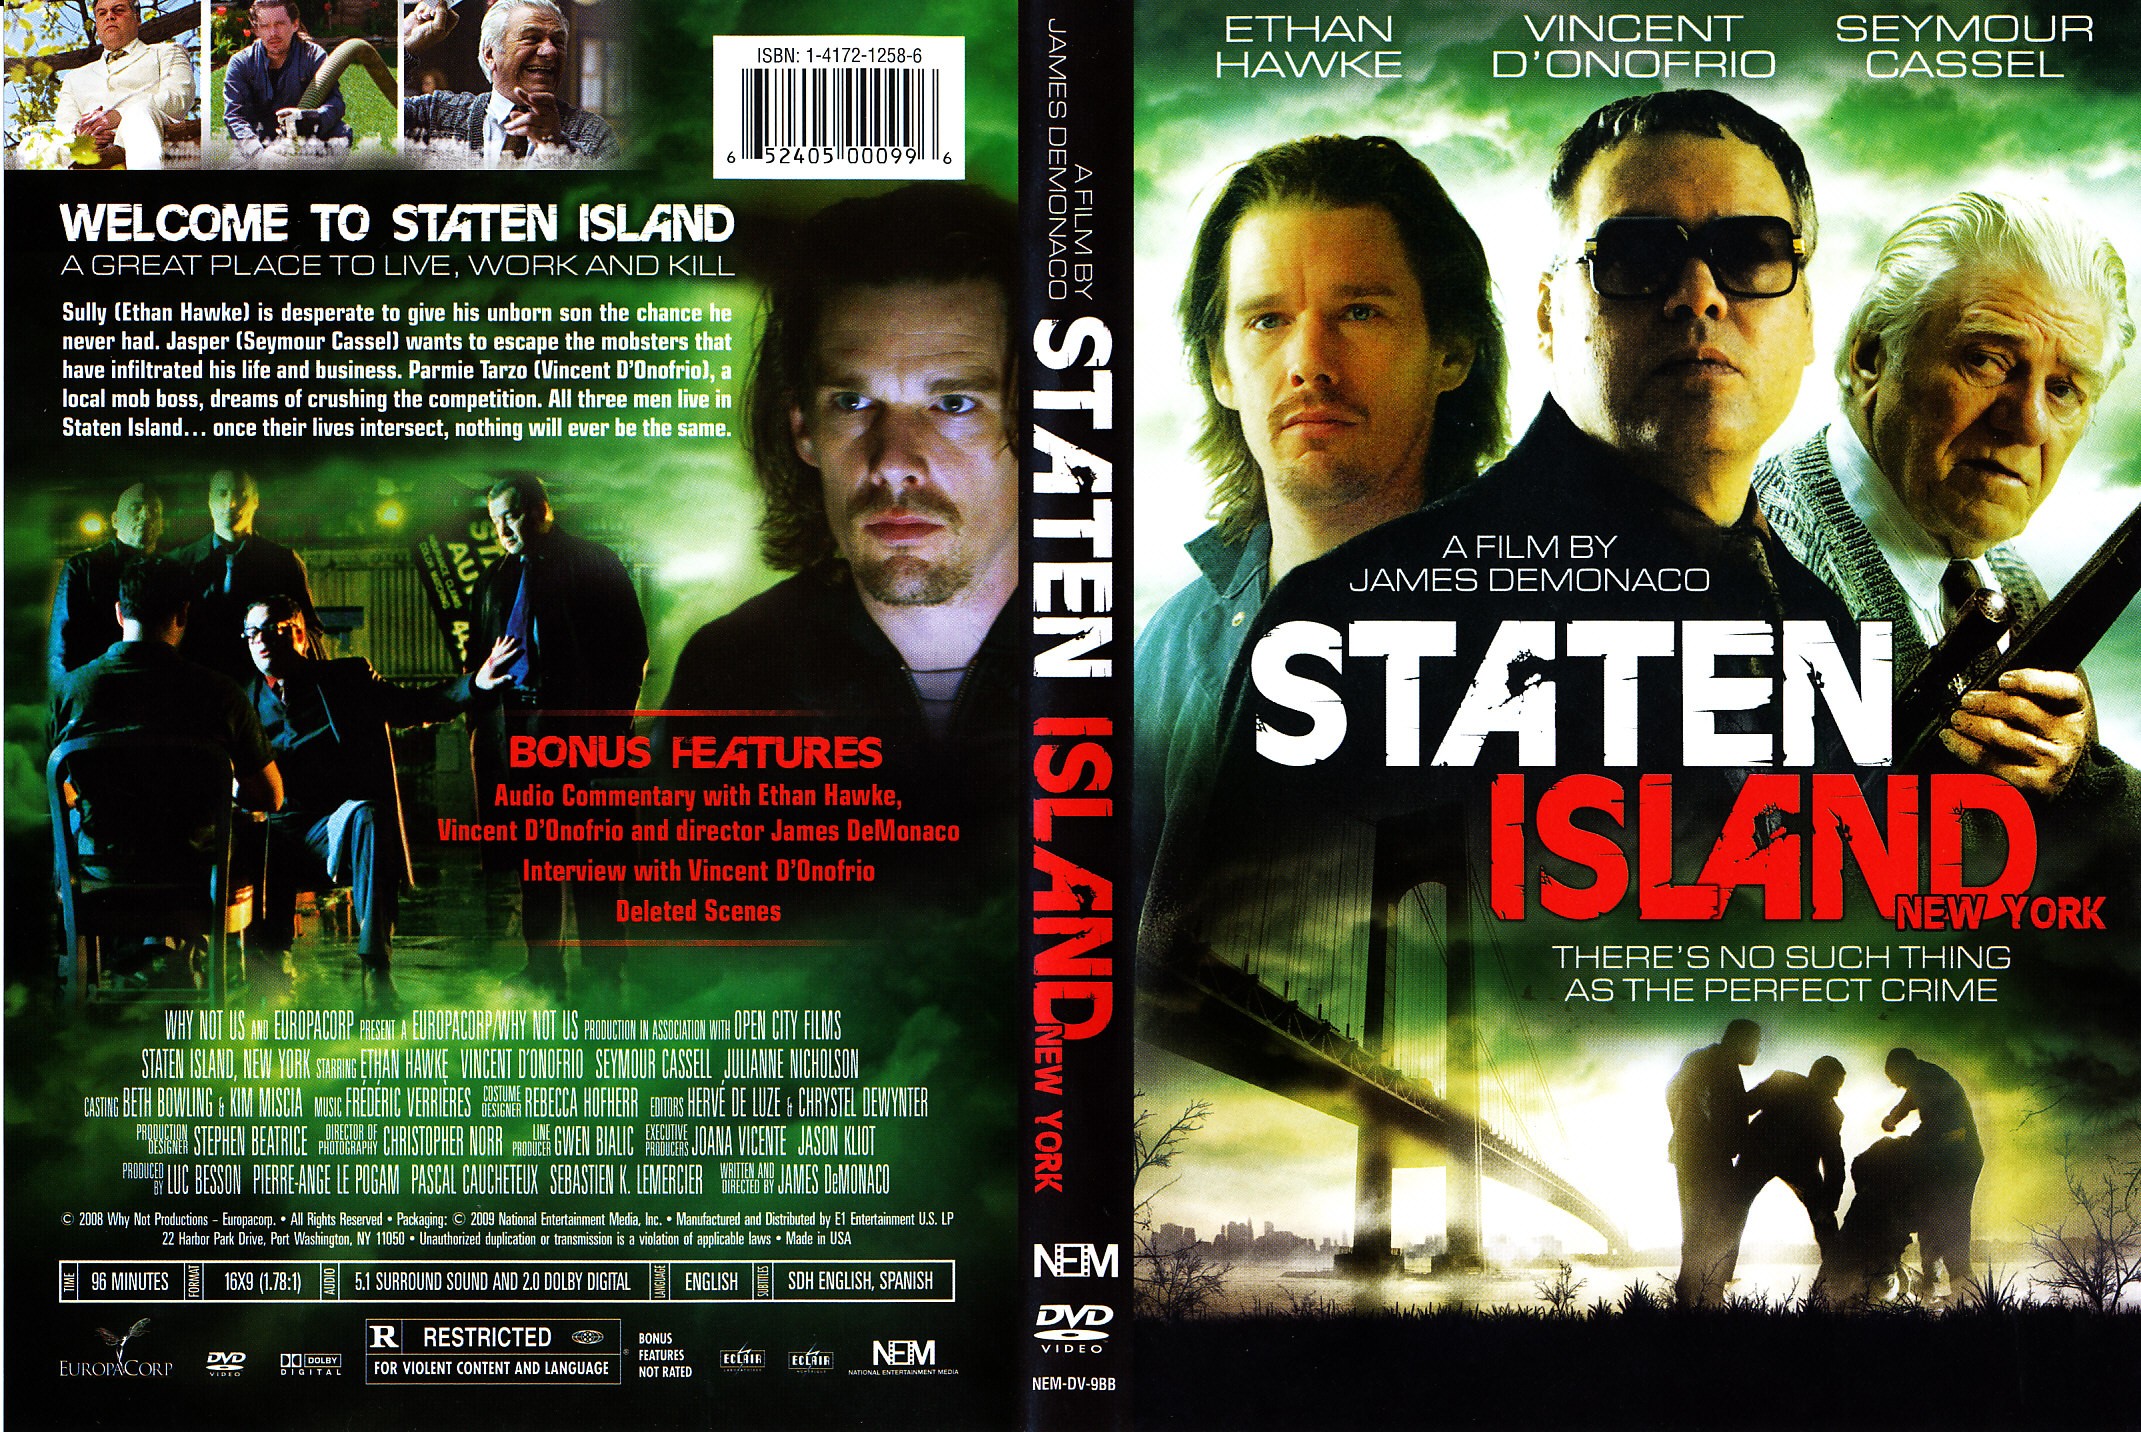 Jaquette DVD Welcome to staten island